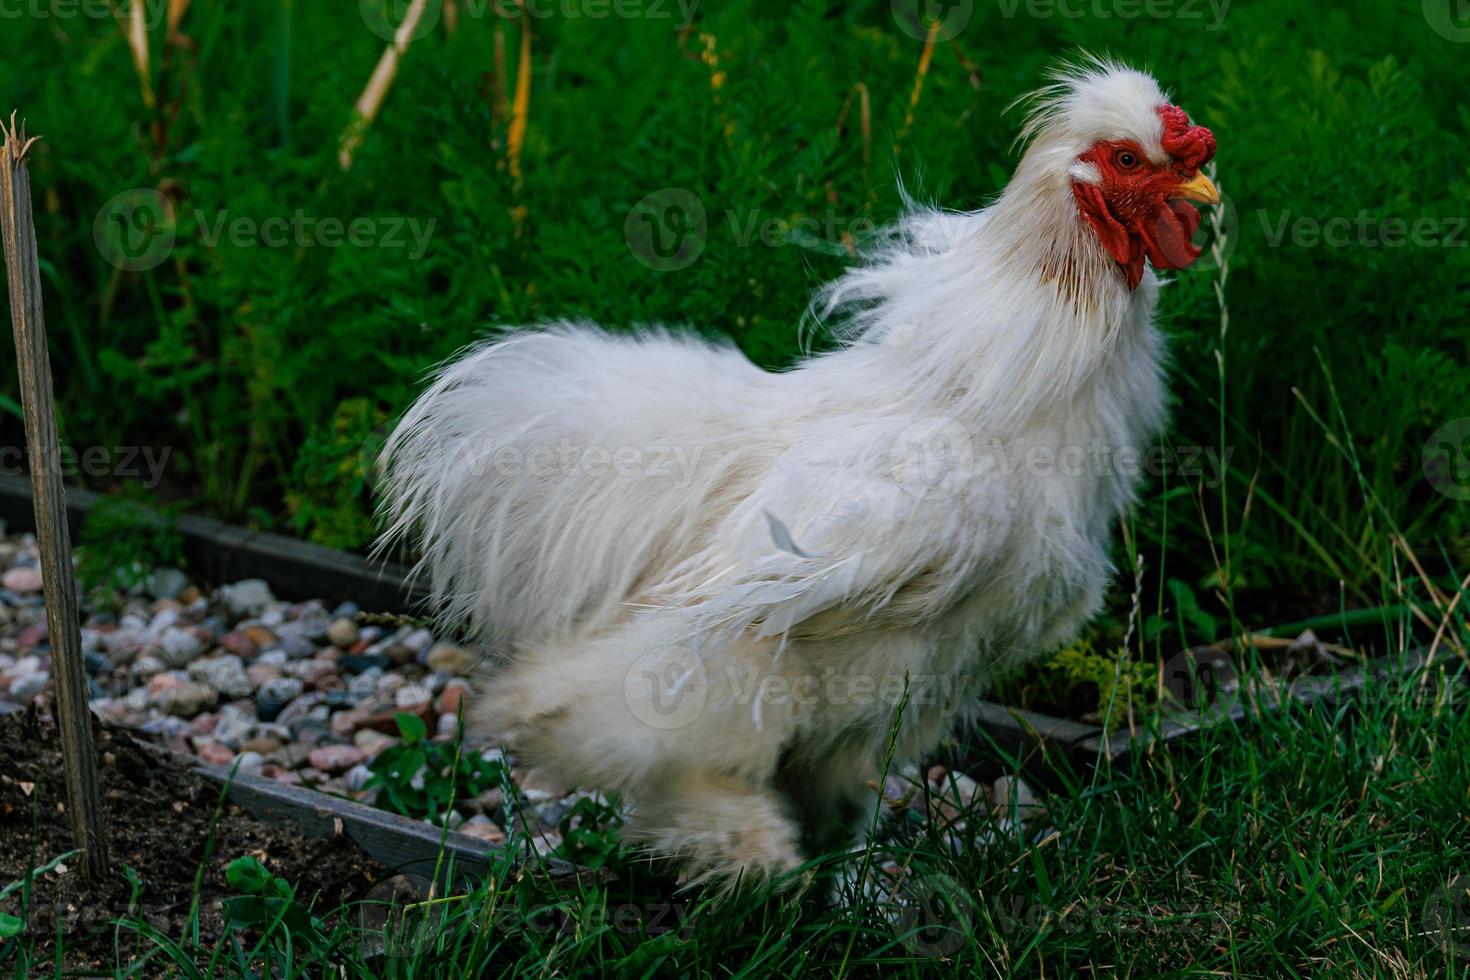 purebred hens on the green grass in the garden on a summer day organic farming photo